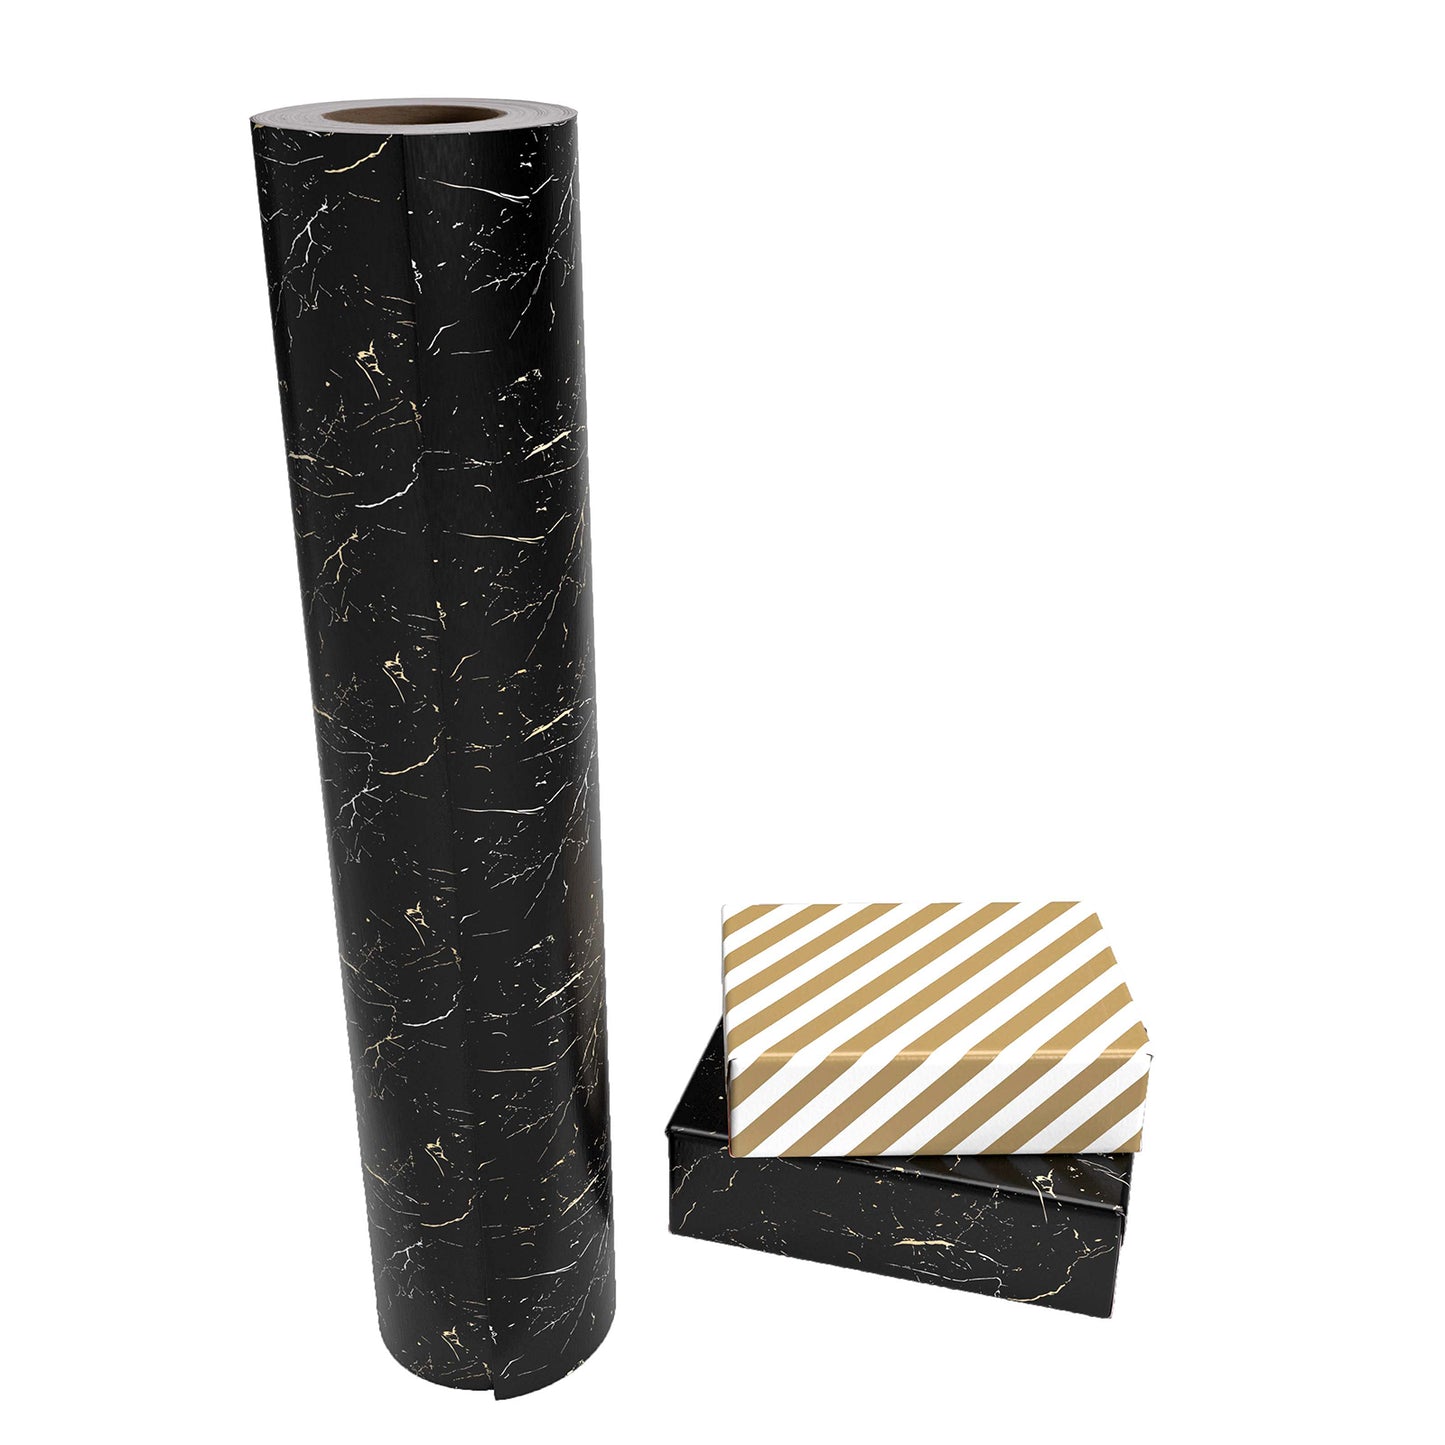 Black & Gold Marble Wrapping Paper with Gold Stripe Jumbo Roll Wholesale